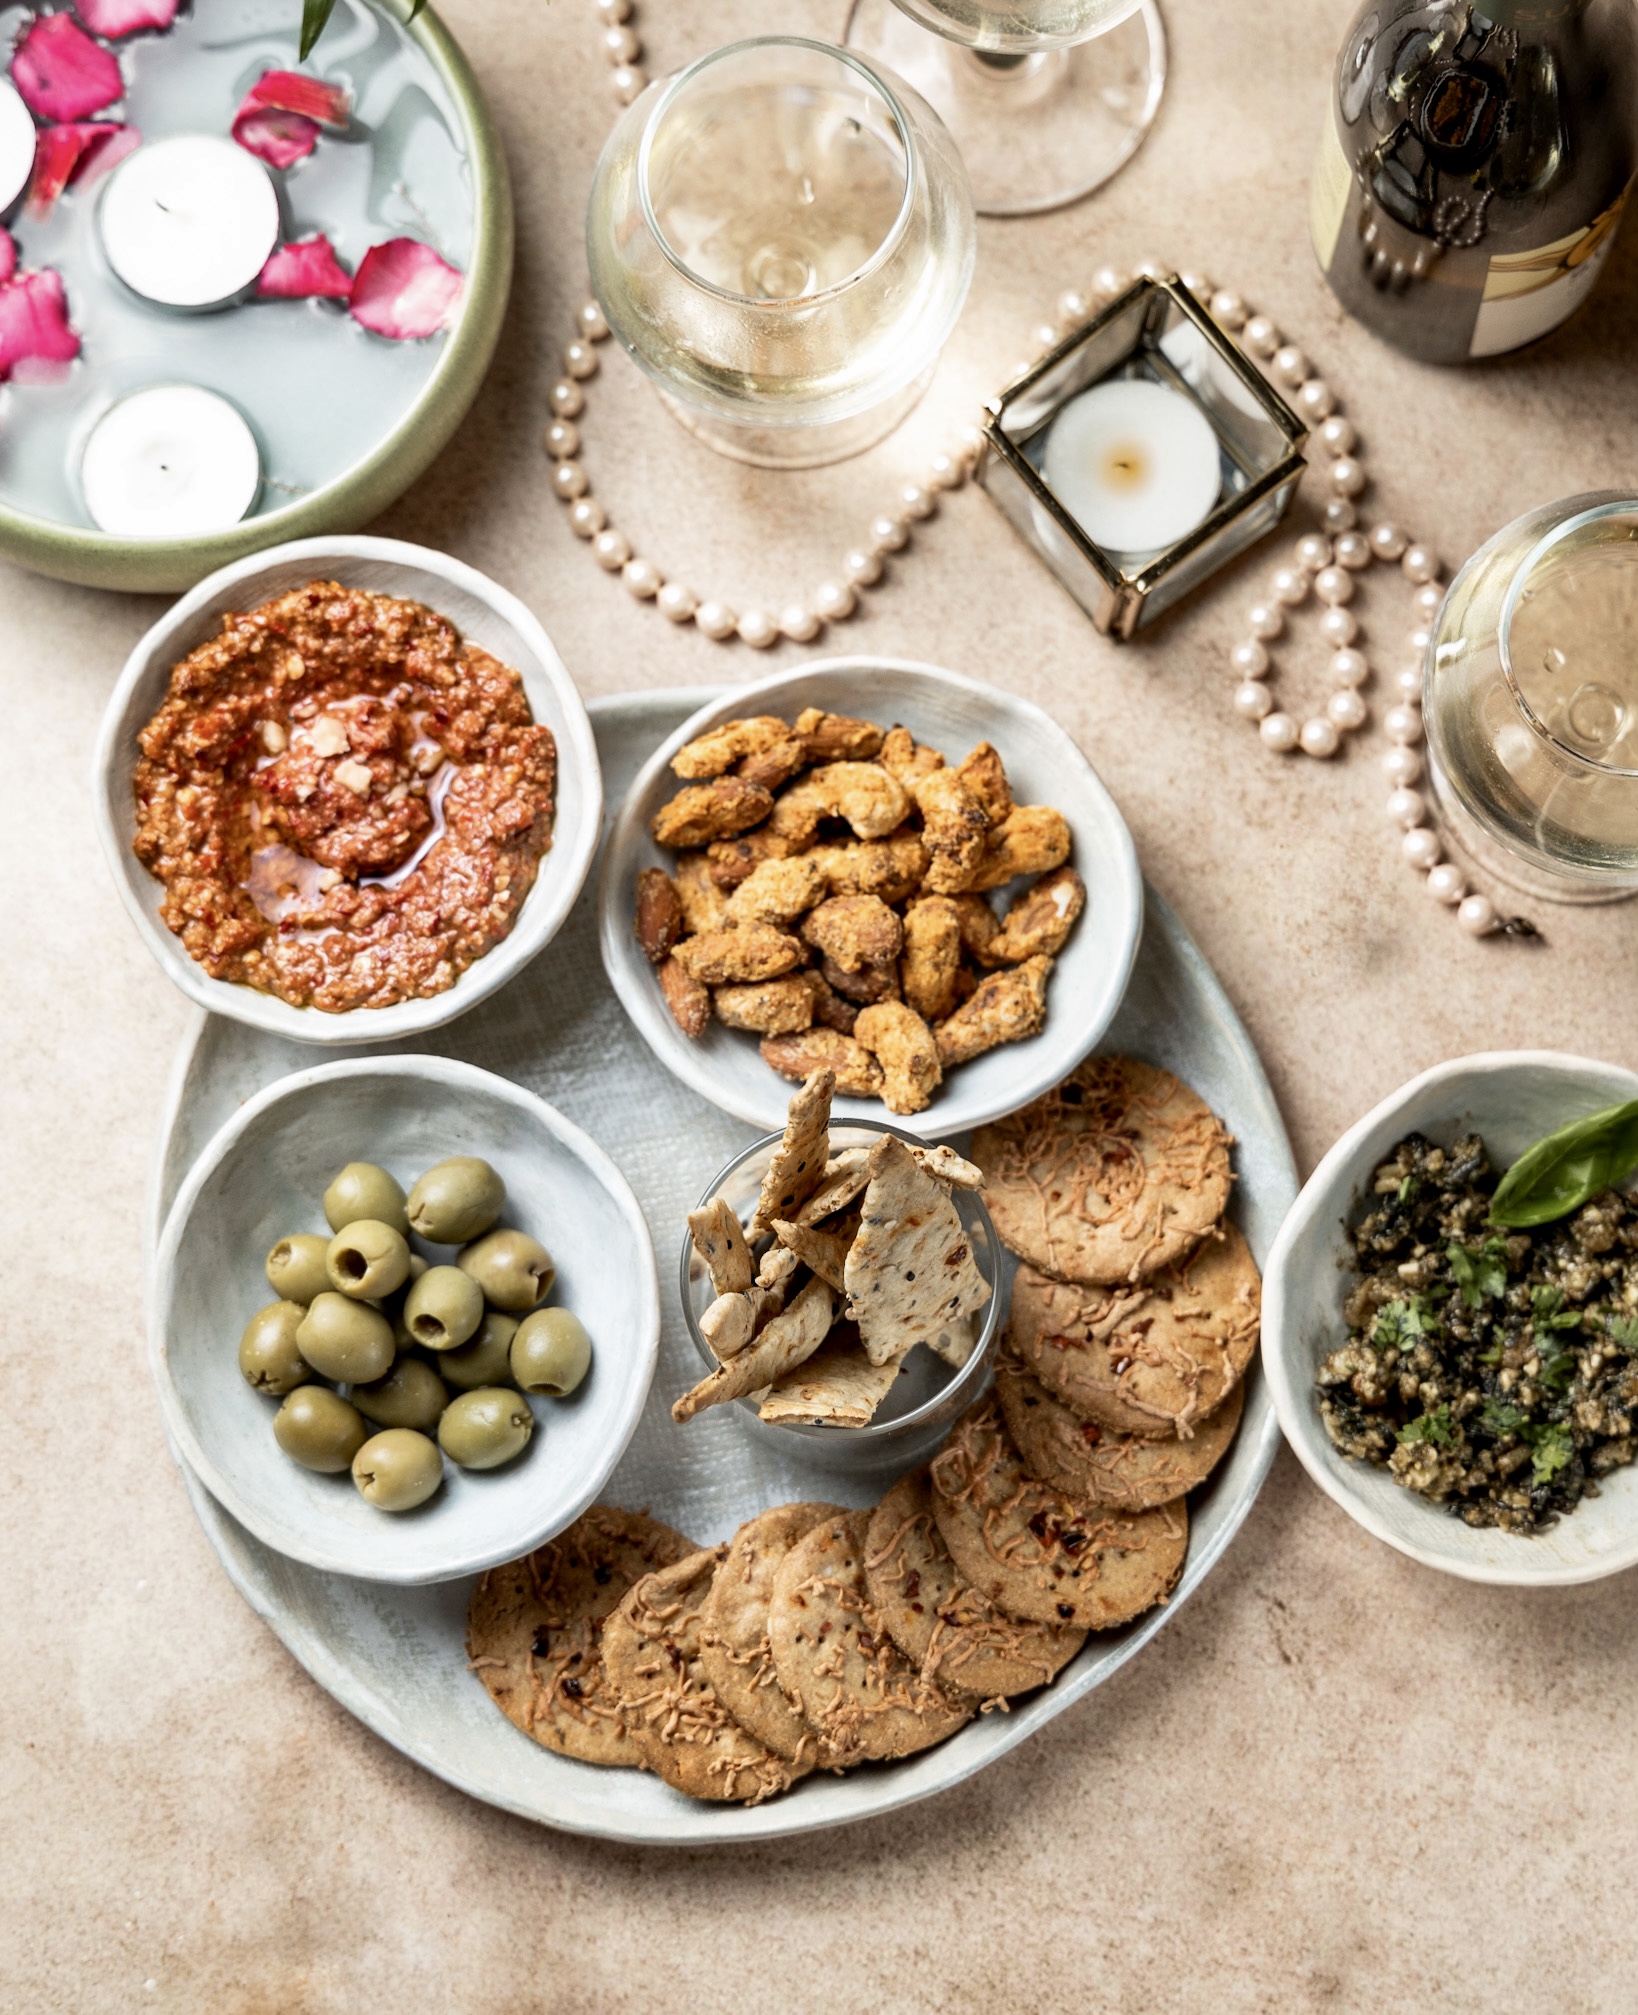 Party Platter – Lavash Crackers Dips